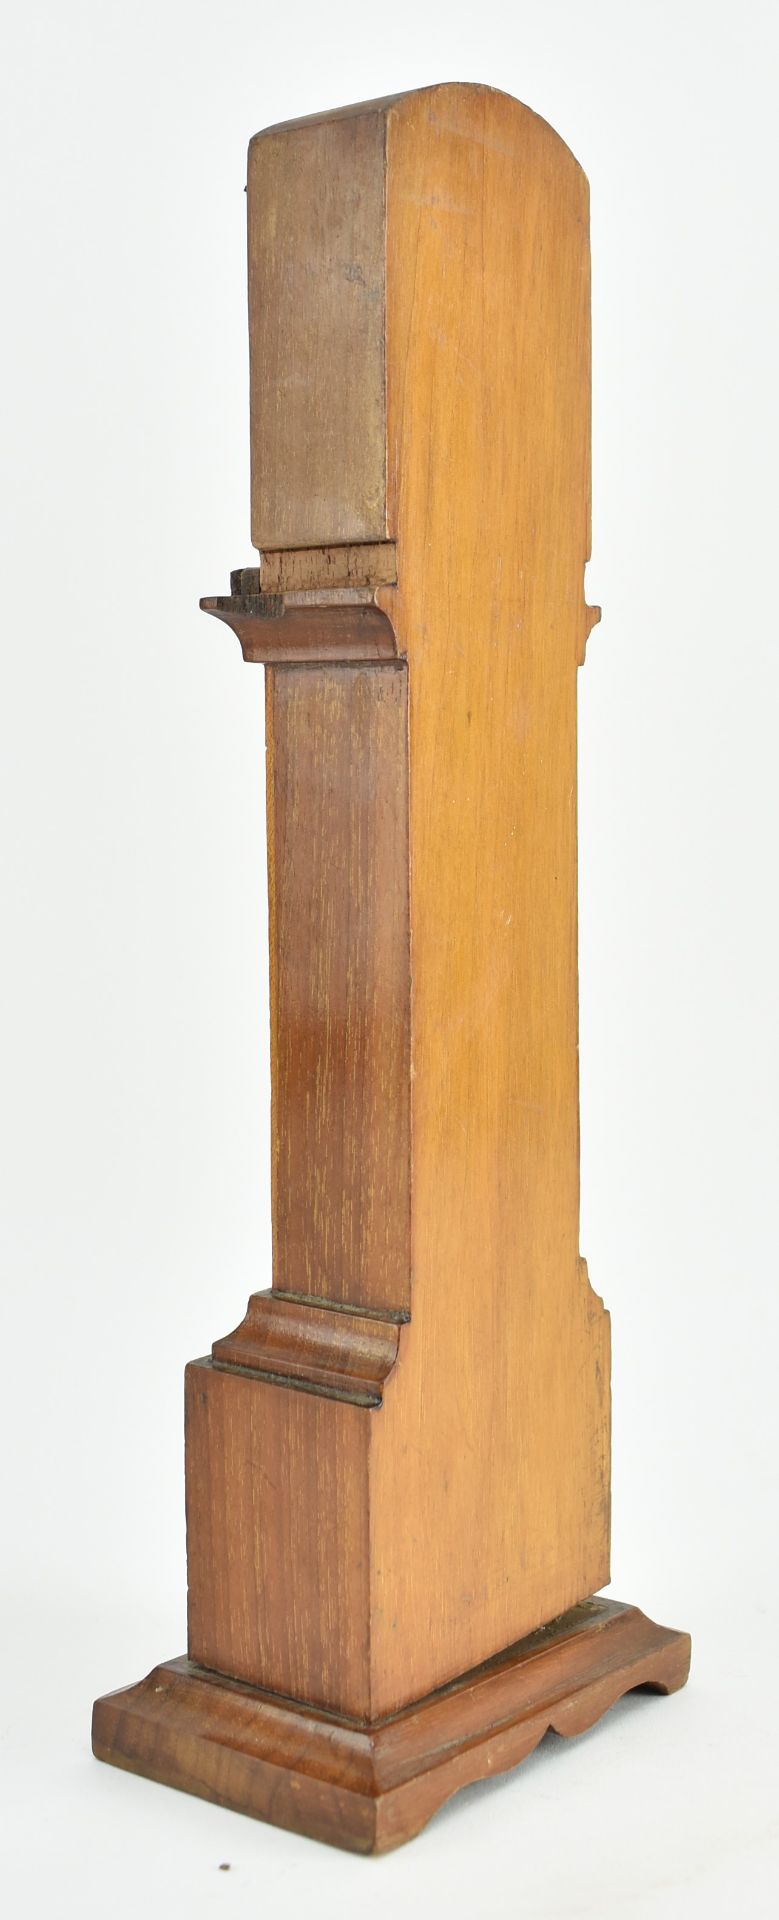 POCKET WATCH HOLDER IN FORM OF GRANDFATHER CLOCK - Image 7 of 9